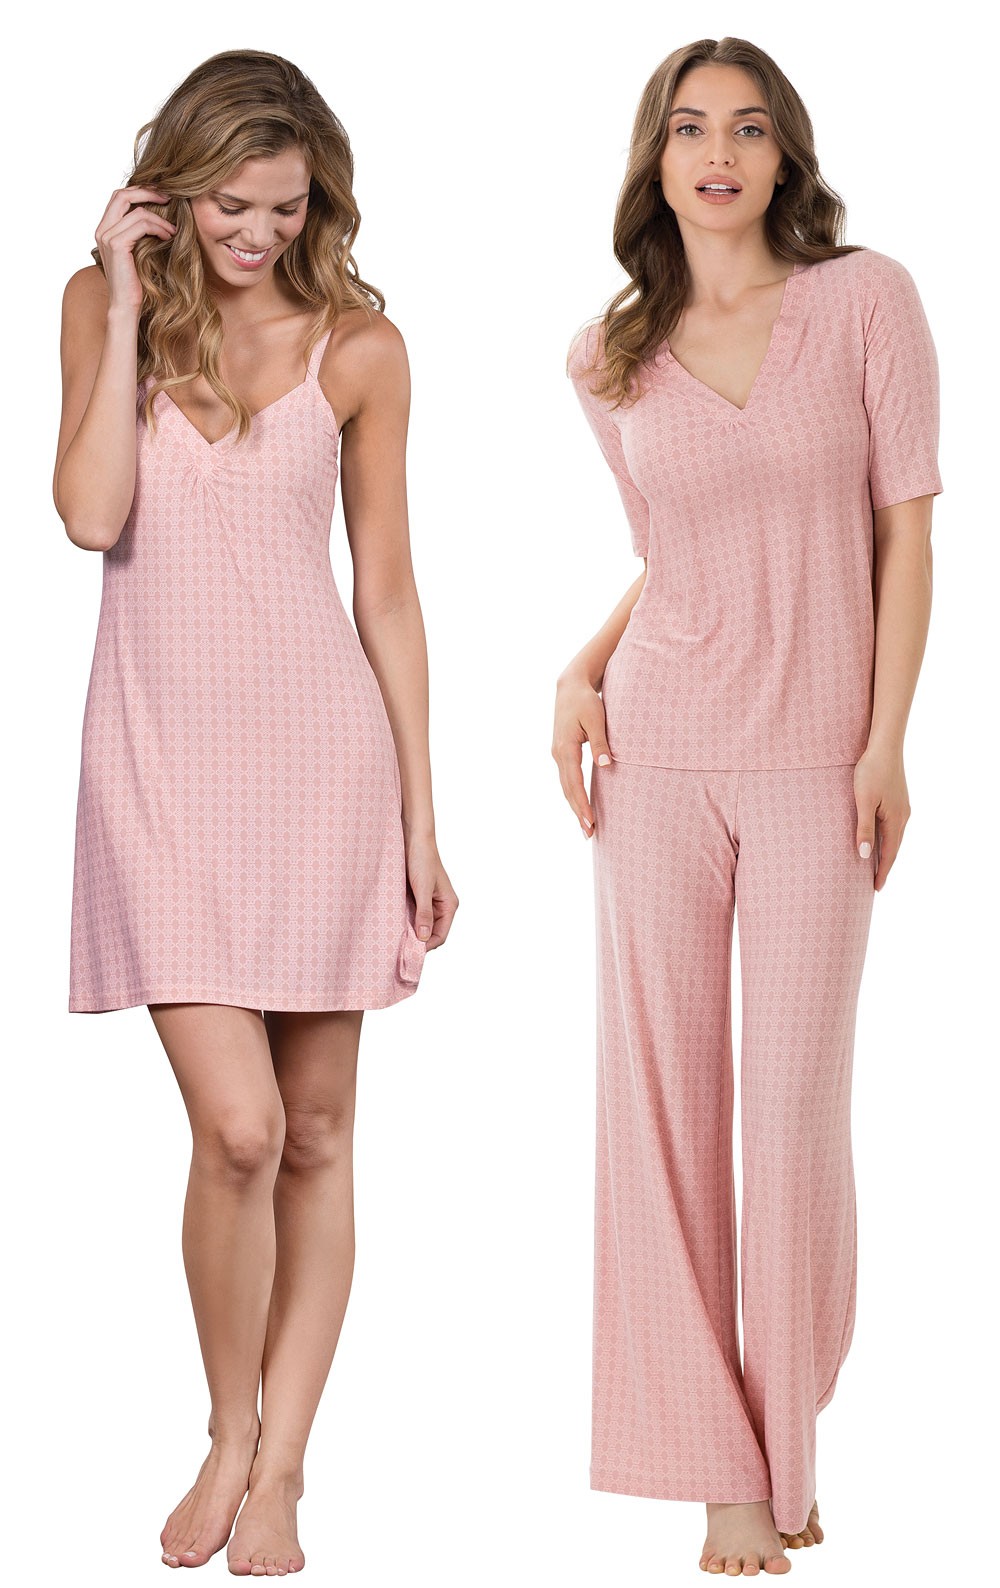 She'll receive: Naturally Nude Chemise - Pink - weightless, silky, sen...